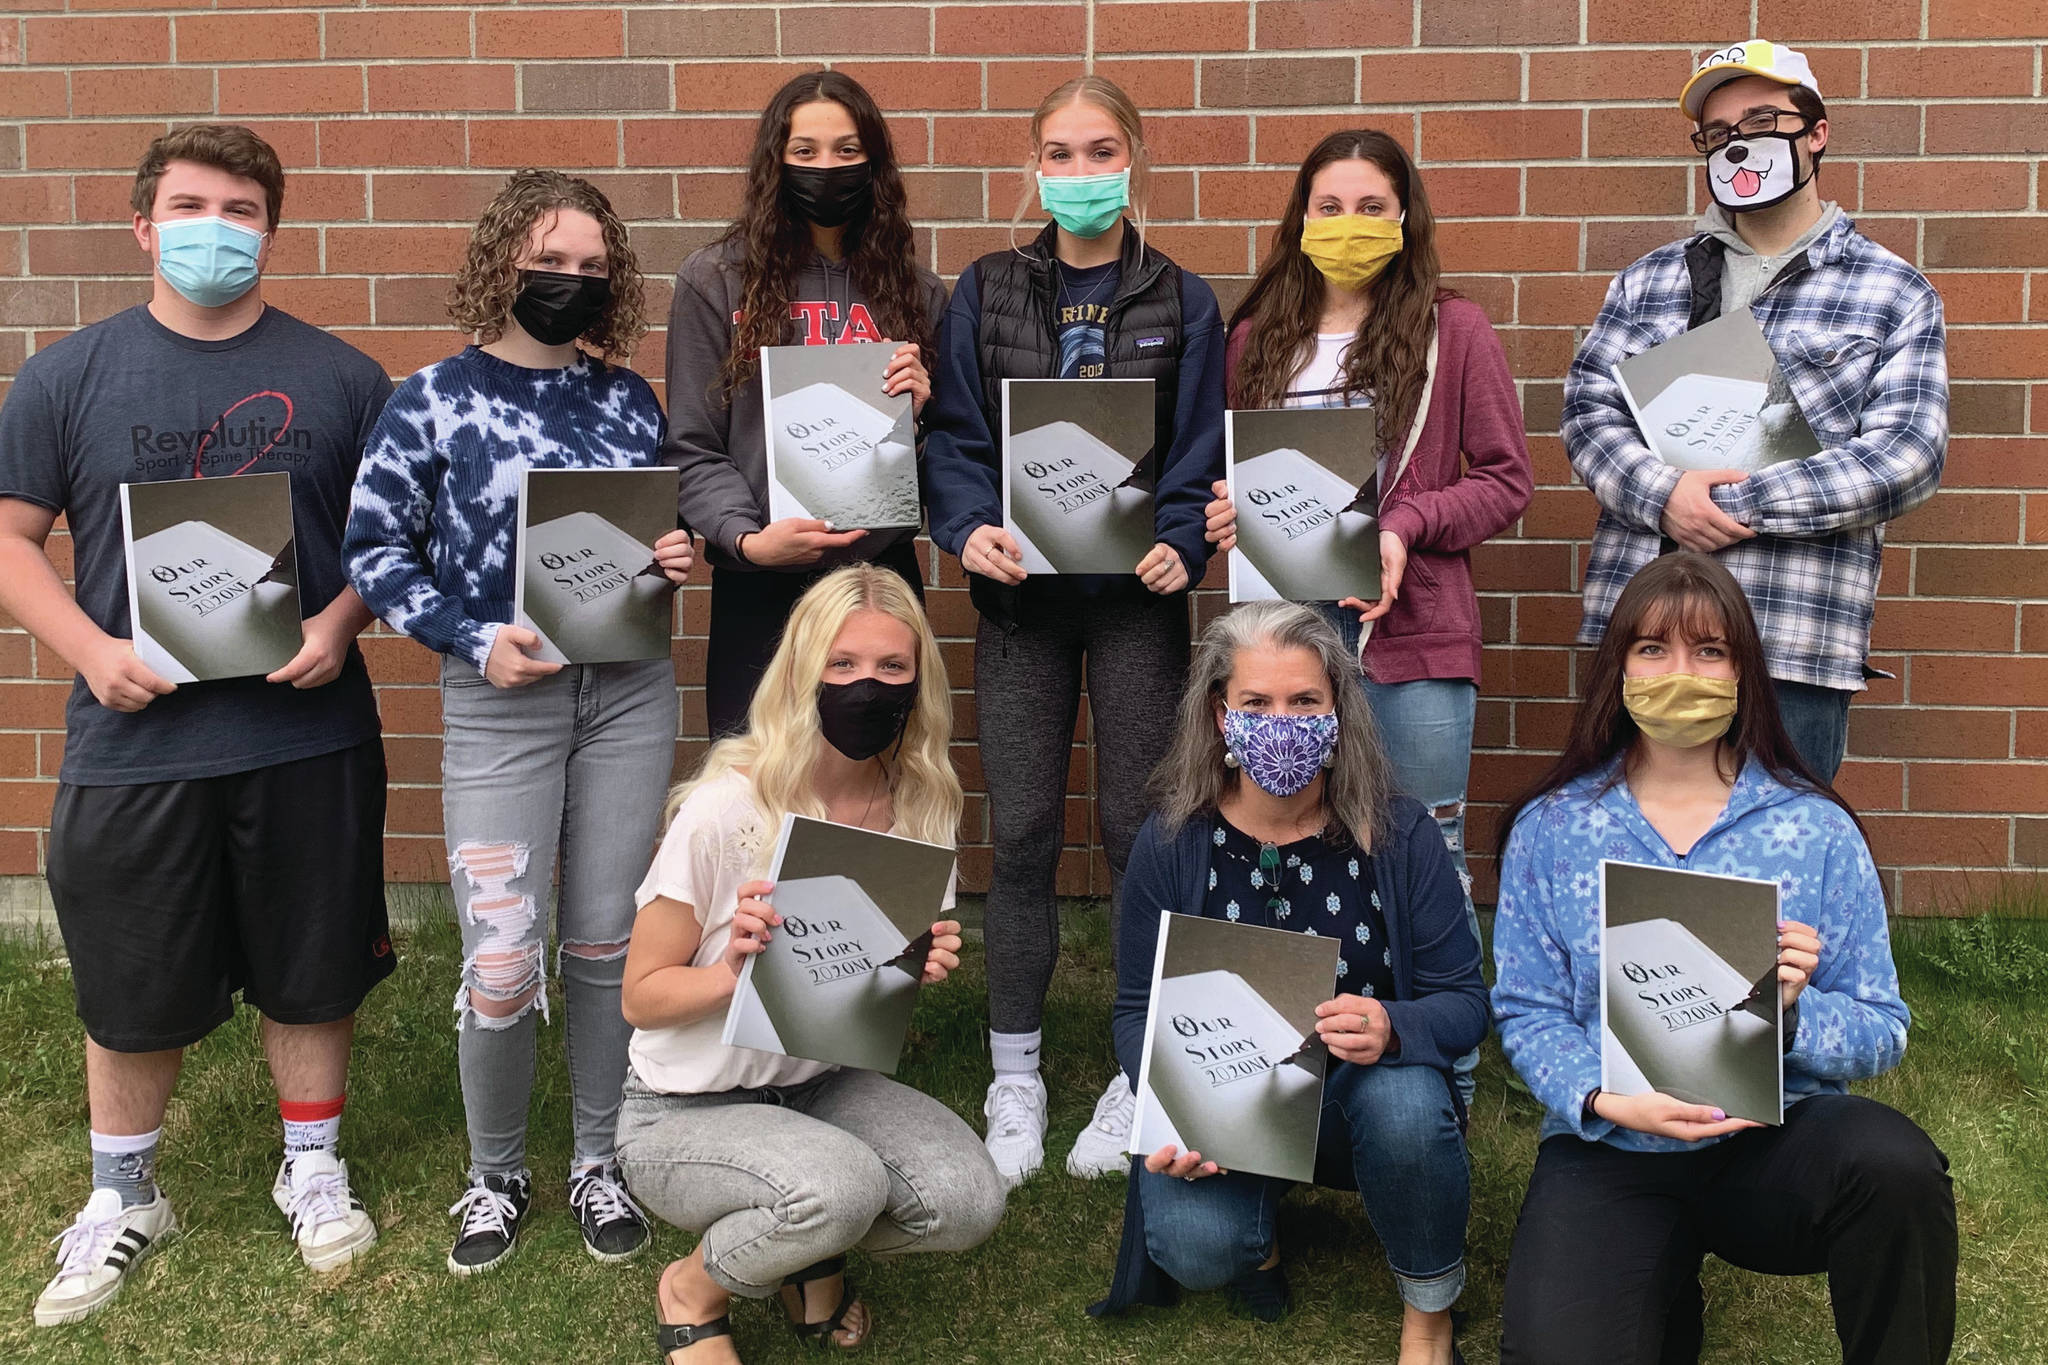 The Homer High School yearbook staff received a Jostens’ national award for the 2021 yearbook. The yearbook “Our Story 202One” was credited for its inclusivity and creativity. Pictured is the yearbook staff with the yearbook. Back row left to right: Kamdyn Doughty, Katelyn Engebretsen, Madison Story, Paige Jones, Hannah Hatfield and Tristyn Romeril. Bottom row: Mya Houglum, Suzanne Bishop and Mariah McGuire. Photo submitted by Suzanne Bishop.